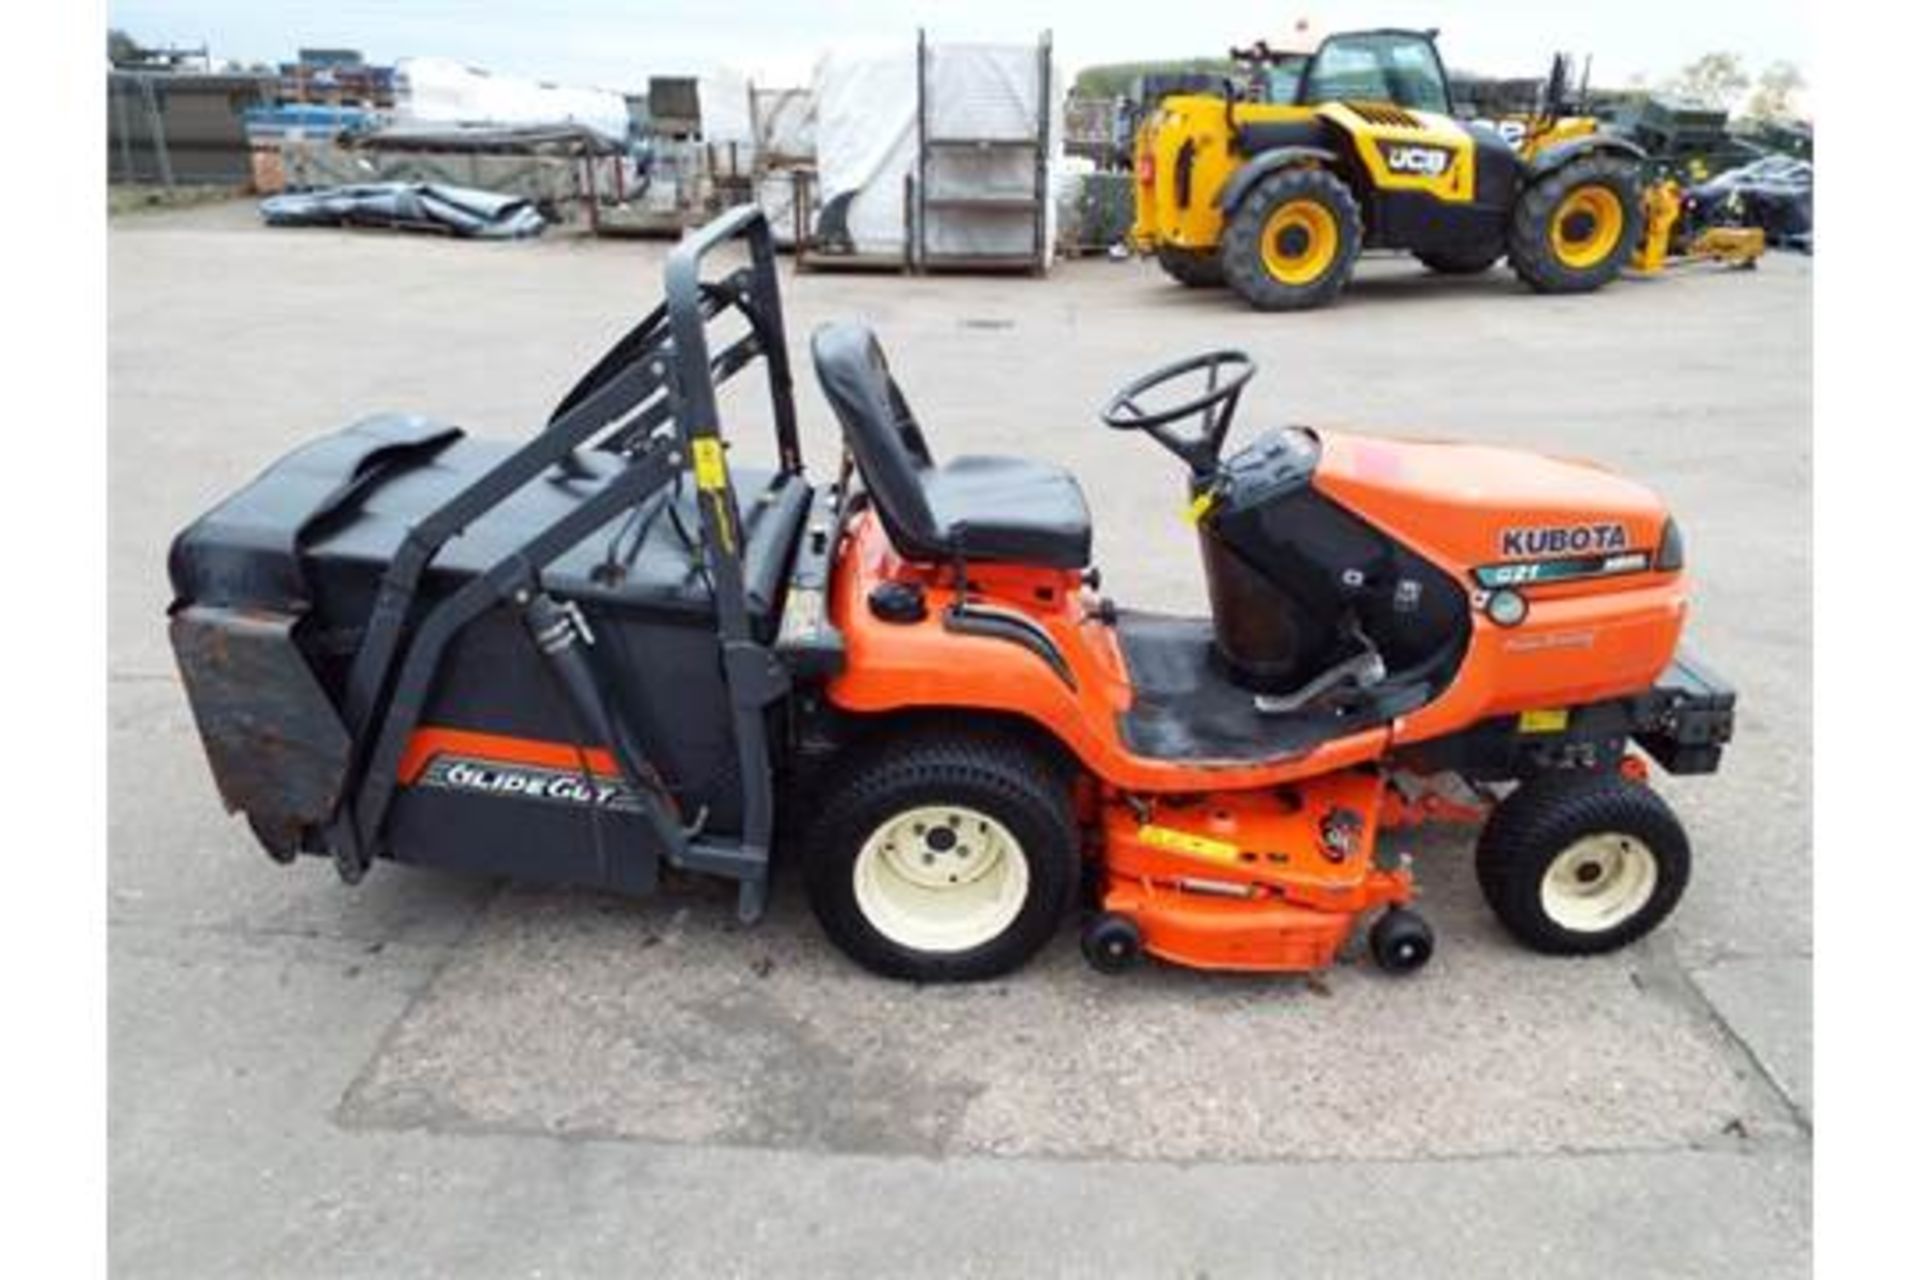 2008 Kubota G21 Ride On Mower with Glide-Cut System and High Dump Grass Collector - Image 5 of 22